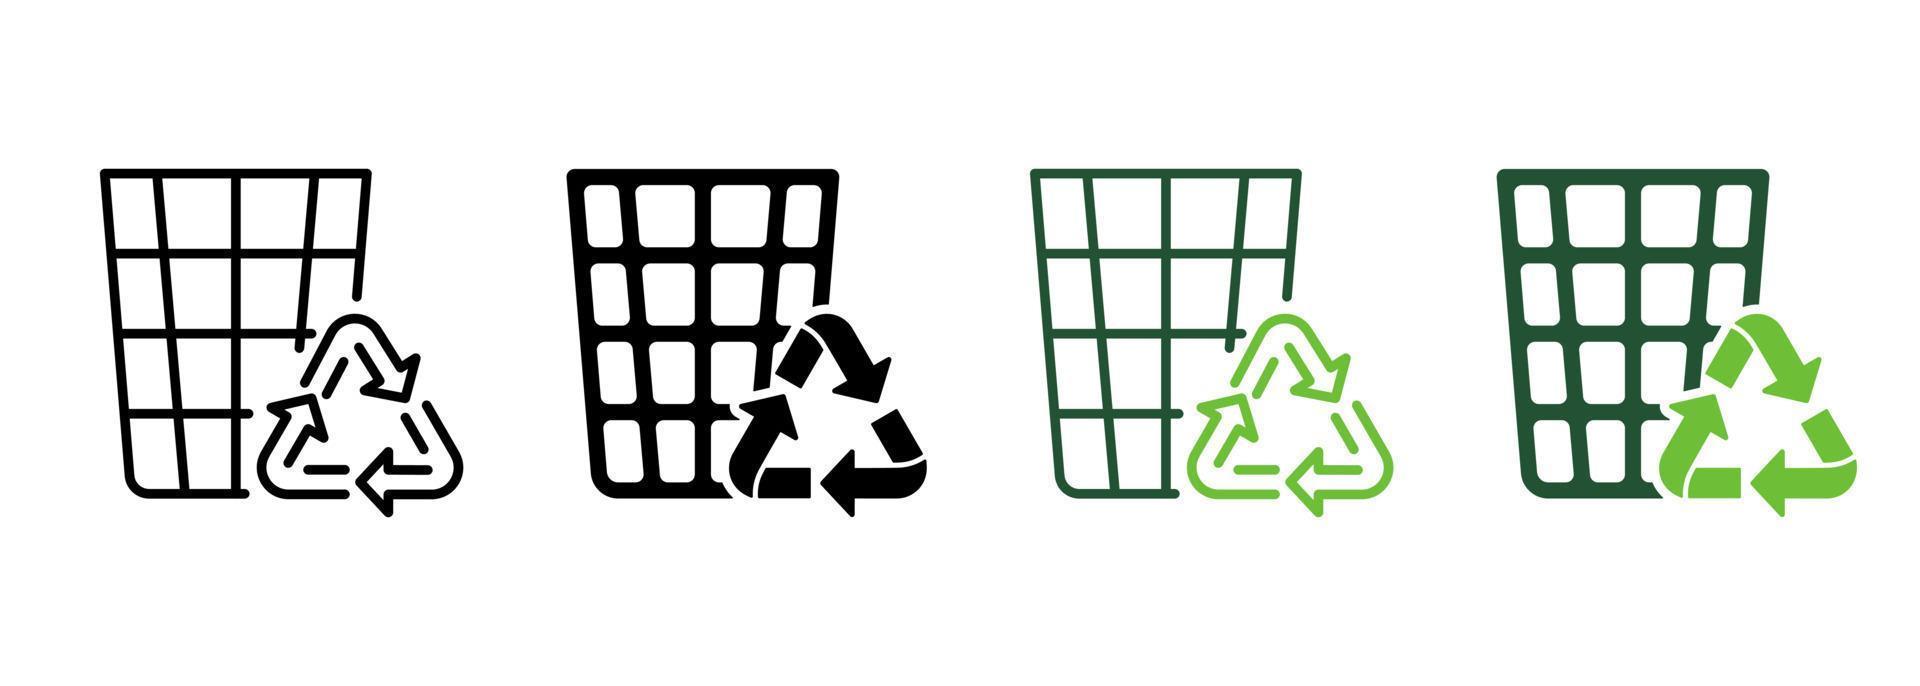 Ecology Dustbin for Garbage Line and Silhouette Icon Color Set. Recycling Eco Bin. Recycle Grid Basket Symbol Collection on White Background. Reuse Container Sign. Isolated Vector Illustration.